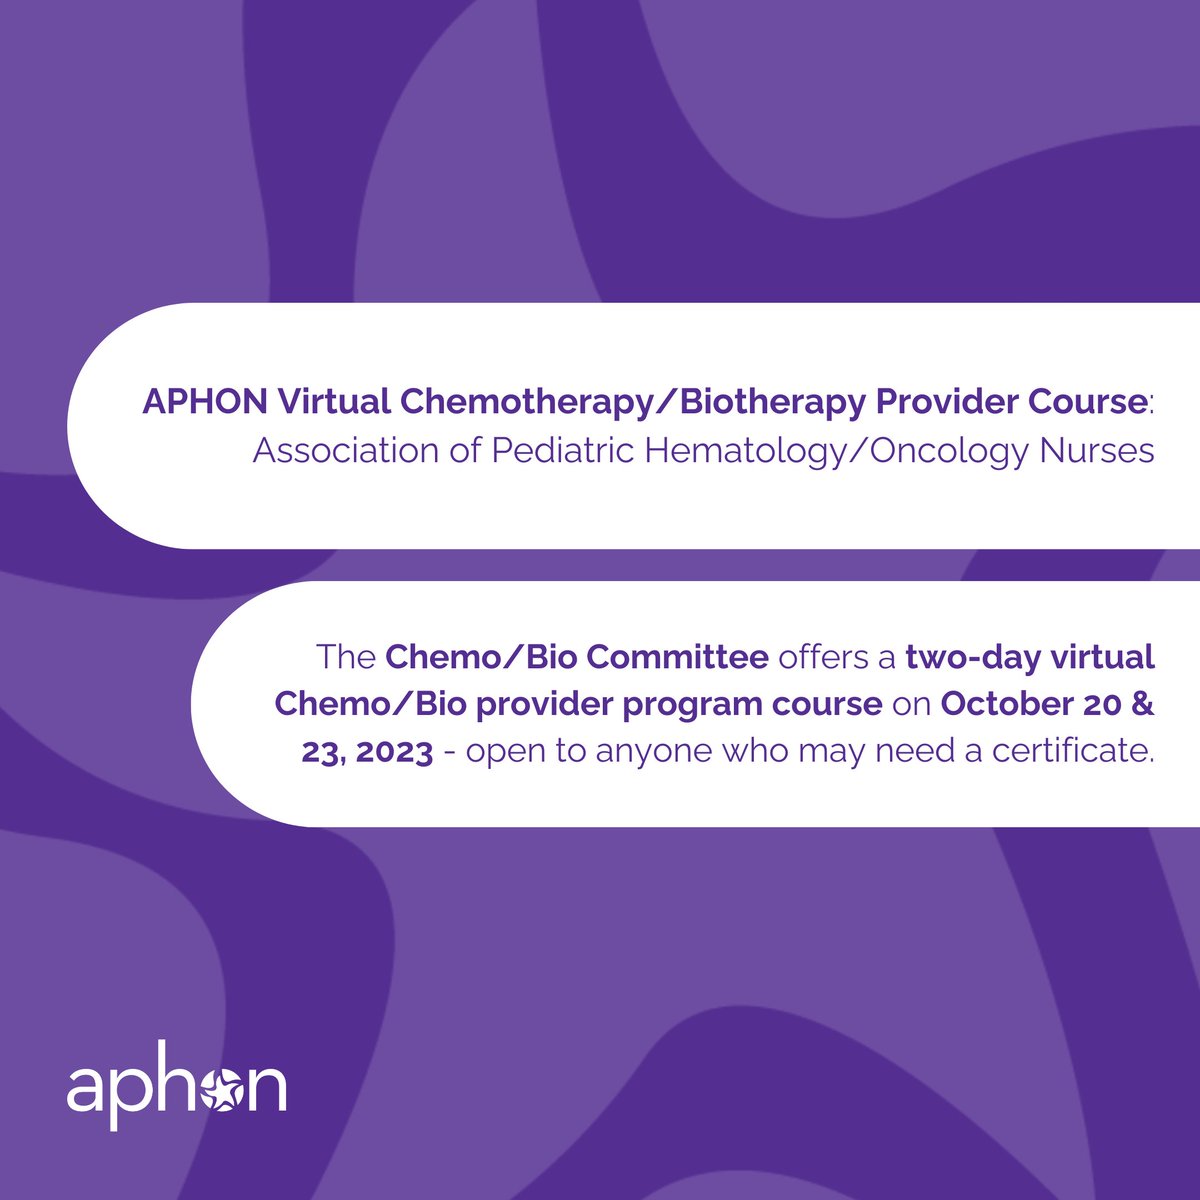 The Chemo/Bio Committee offers a two day virtual Chemo/Bio provider program course open to anyone needing a certificate. It will run on 10/20 and 10/23, but registration closes next week! Click here for more information: bit.ly/APHONChemoBioC…